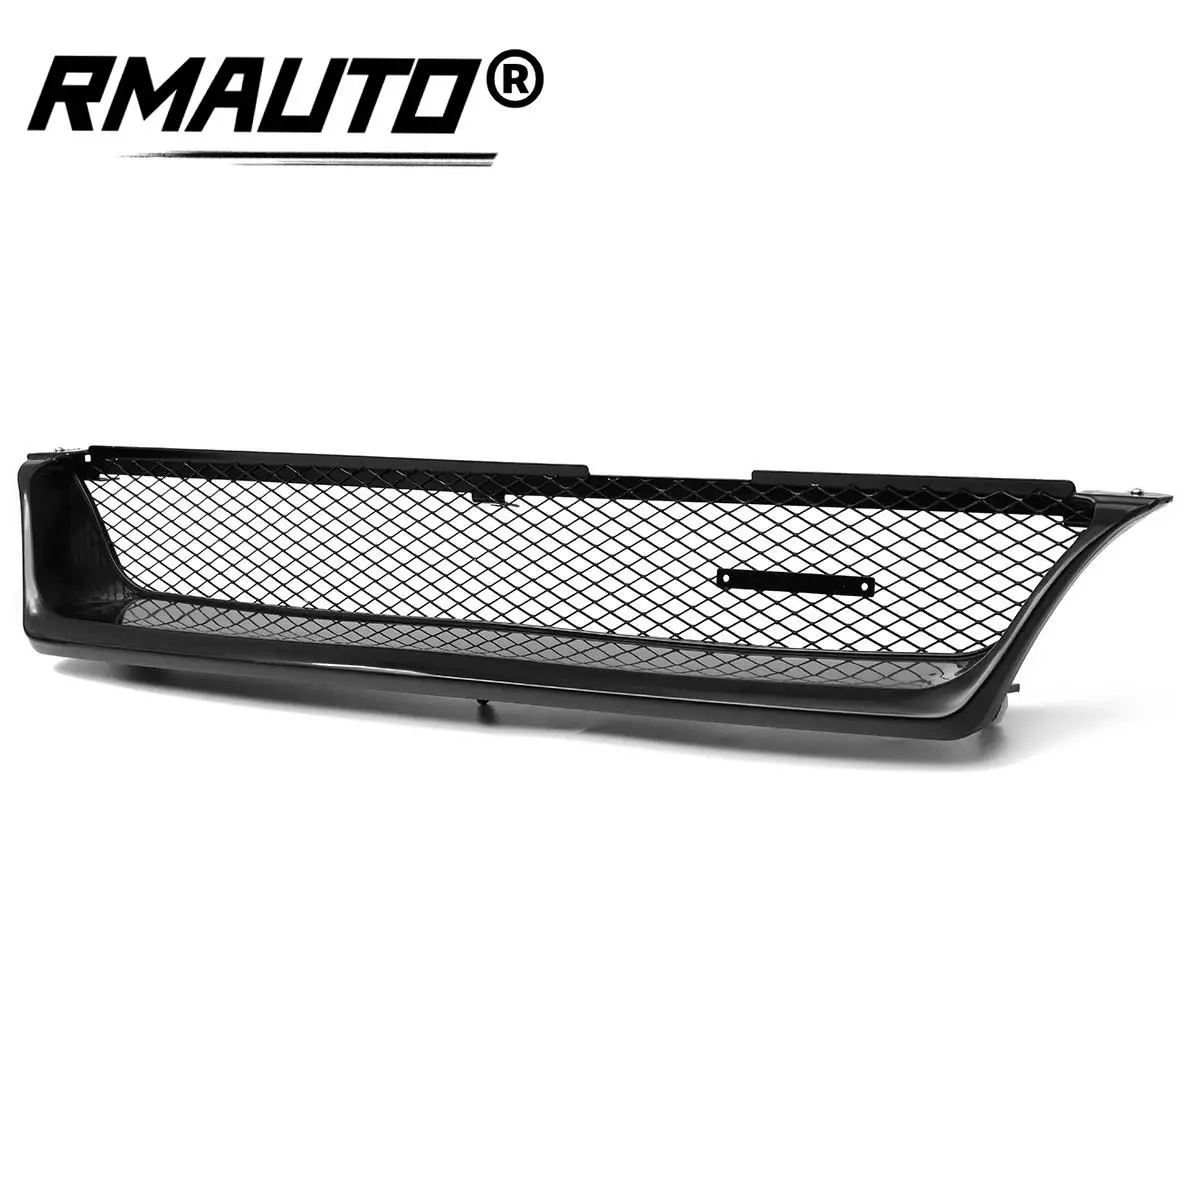 

Glossy Black Racing Grills Car Front Bumper Grille Grill Wagon Style For Toyota Corolla AE101 1993 1994 1995 1996 1997